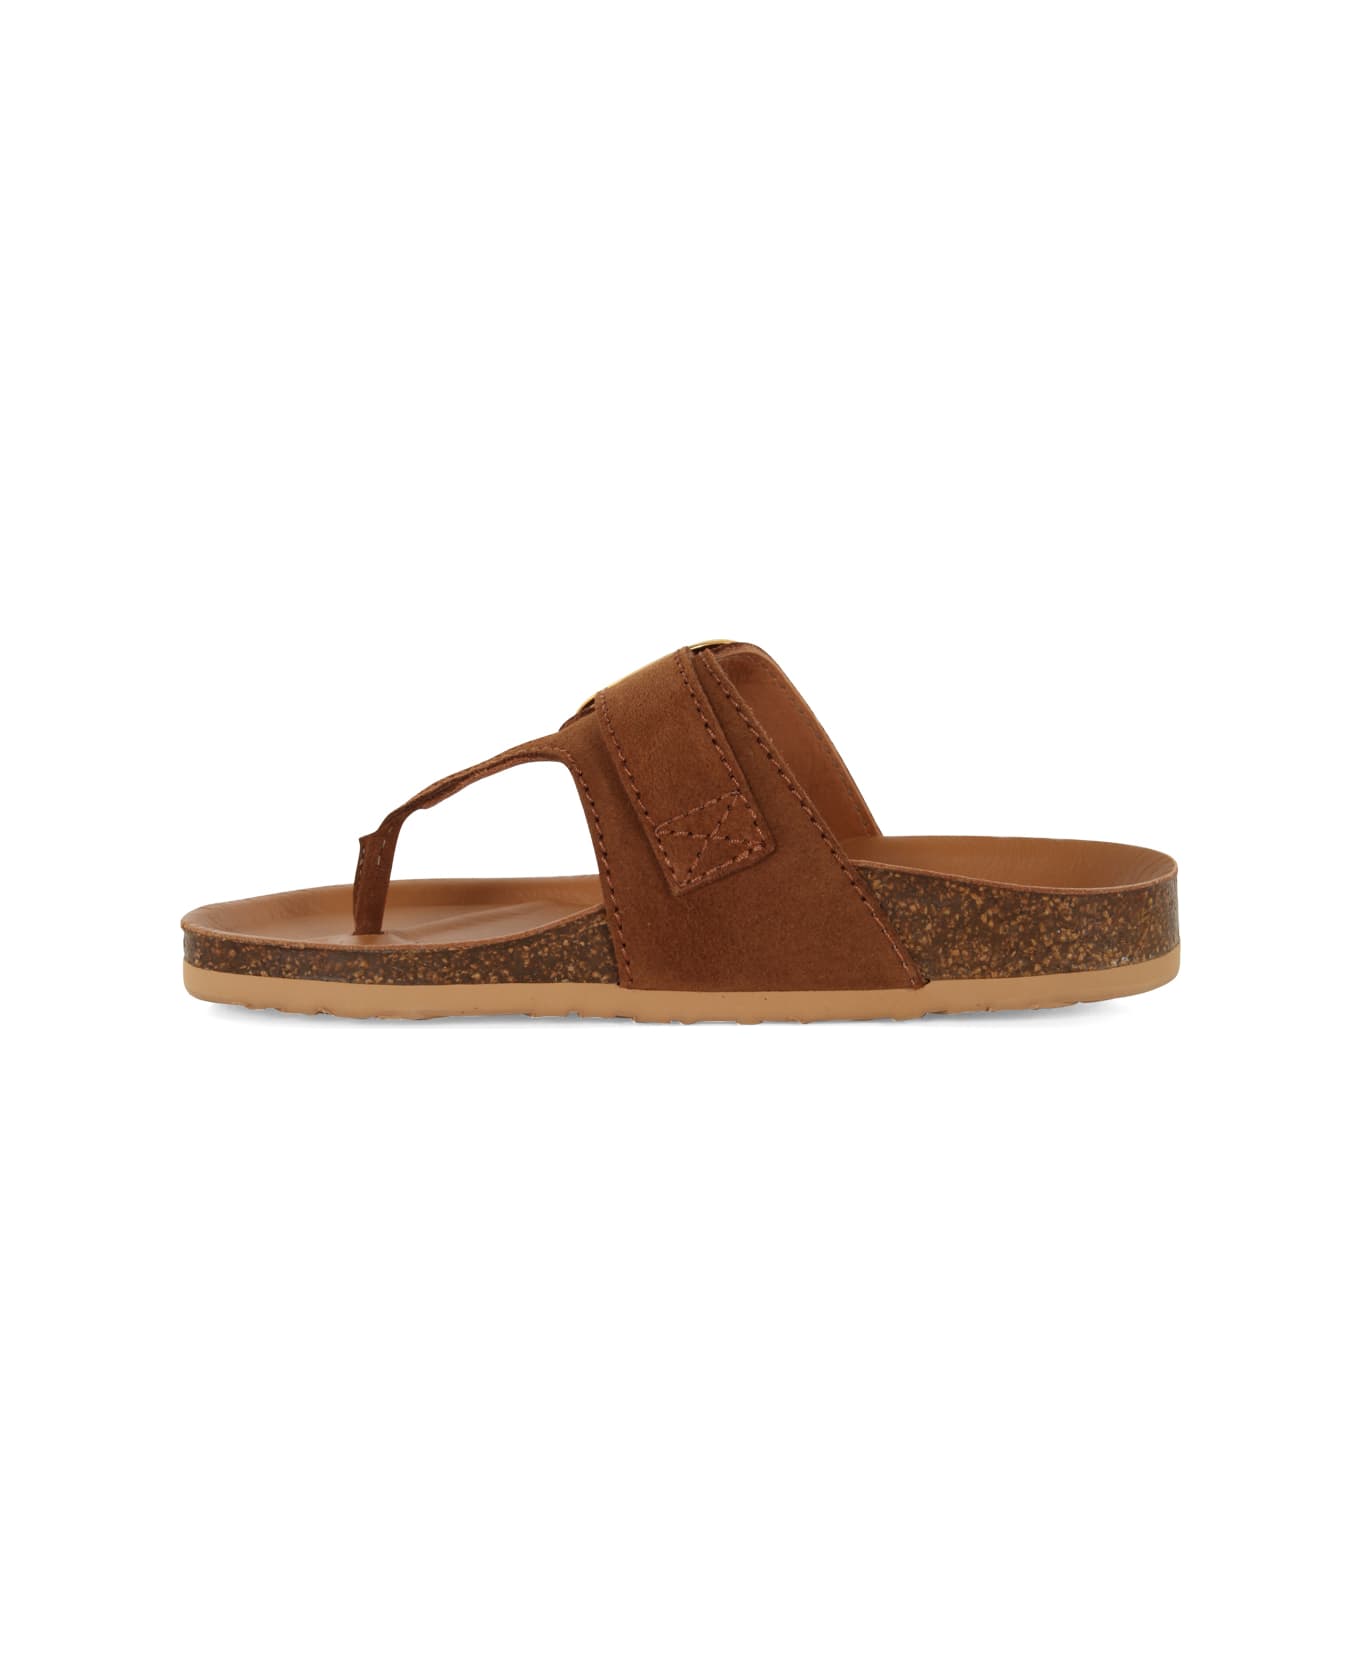 See by Chloé Chany Fussbett Sandals - Tobacco サンダル